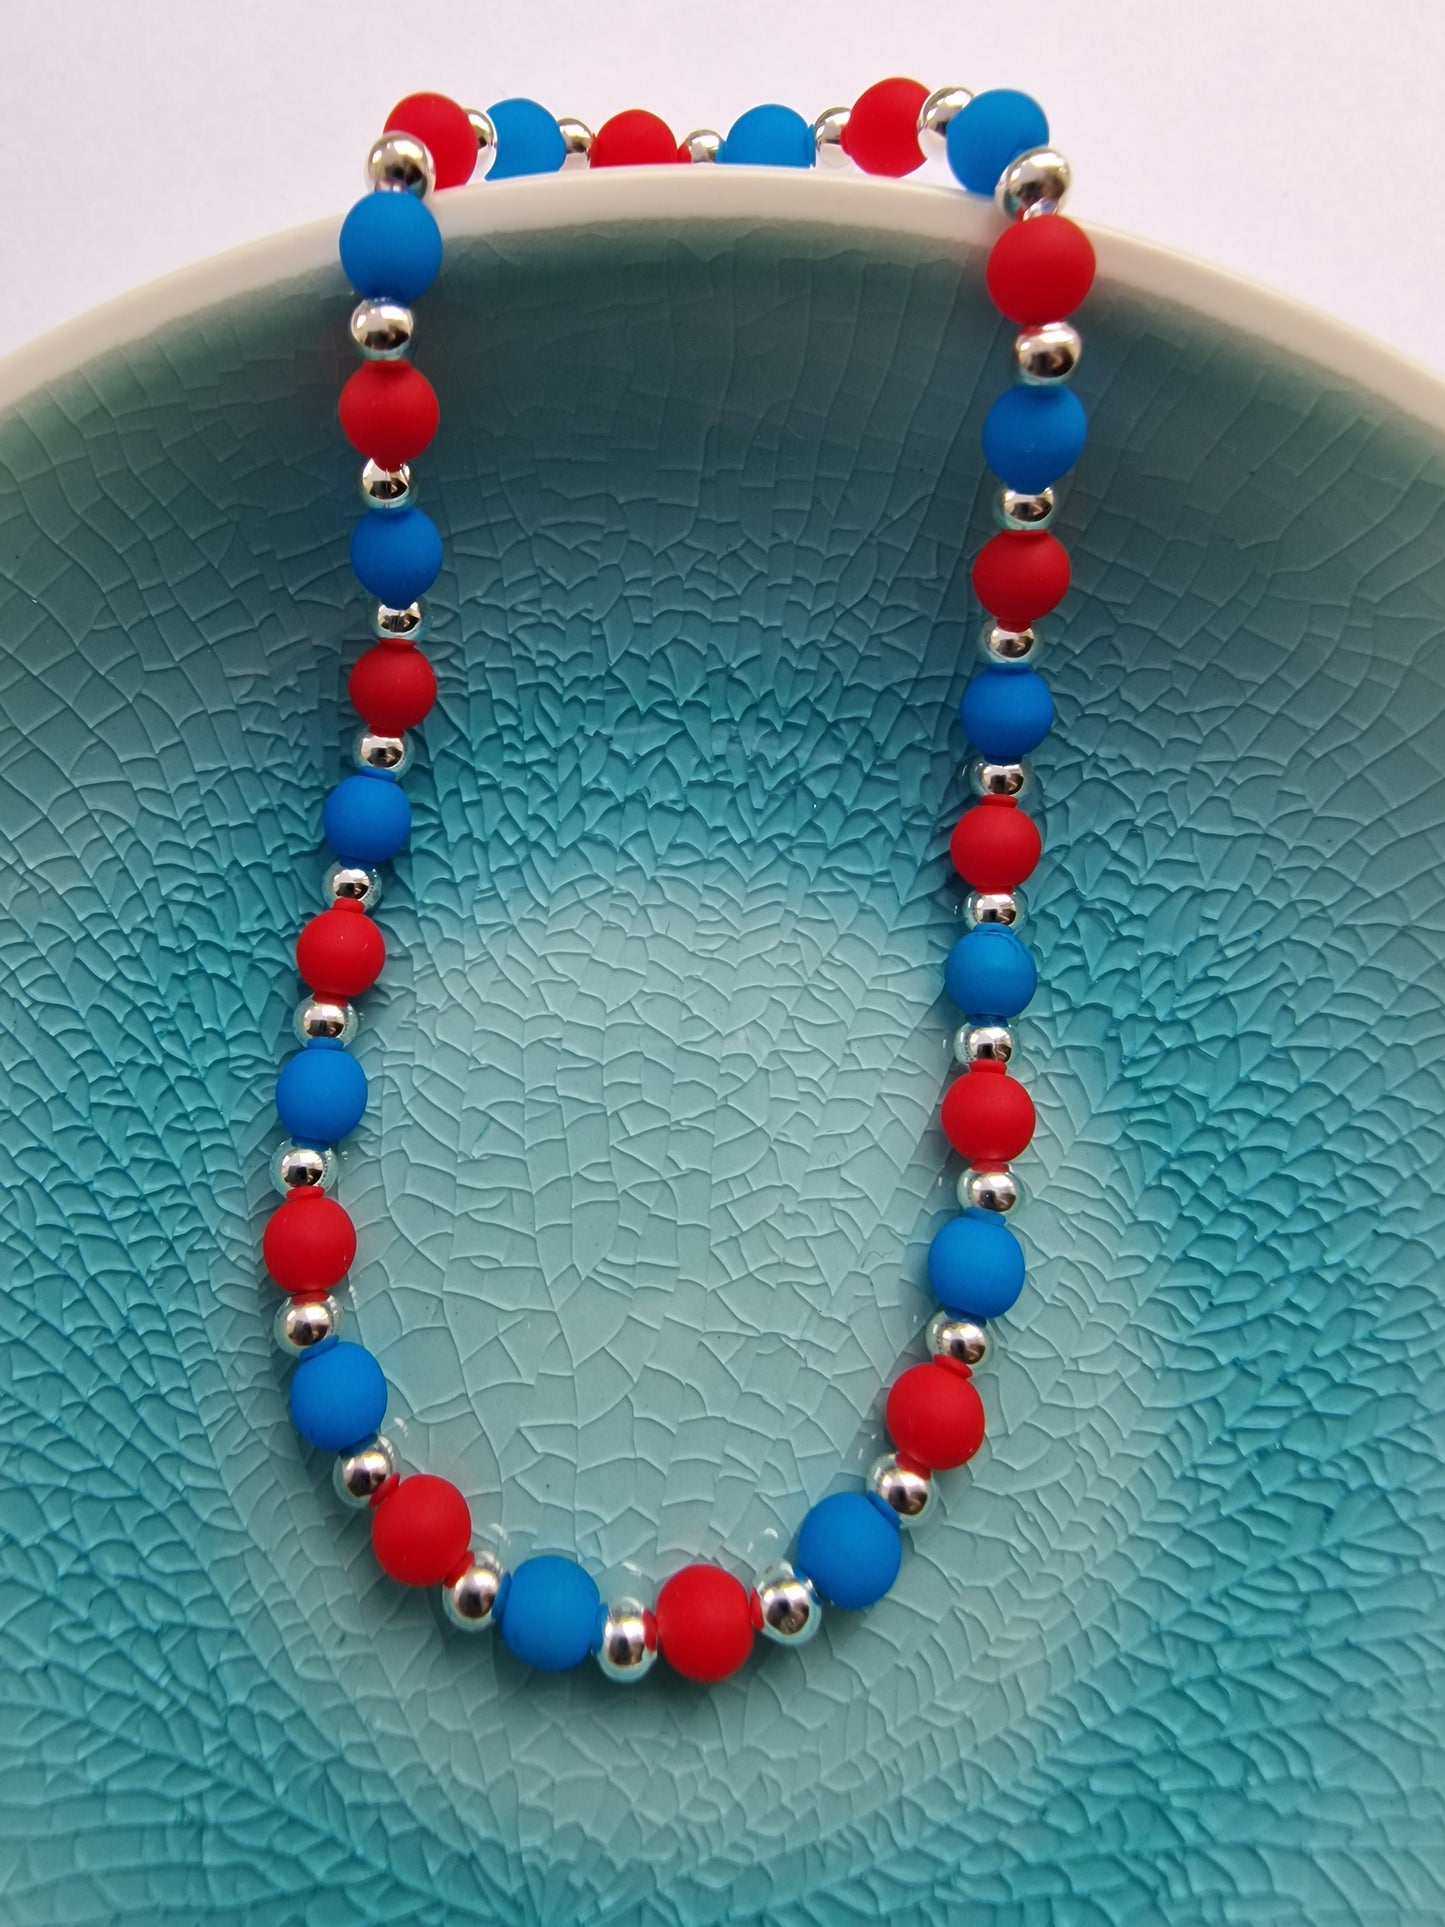 Czech Neon Glass Bead Bracelet in Red and Vibrant Blue